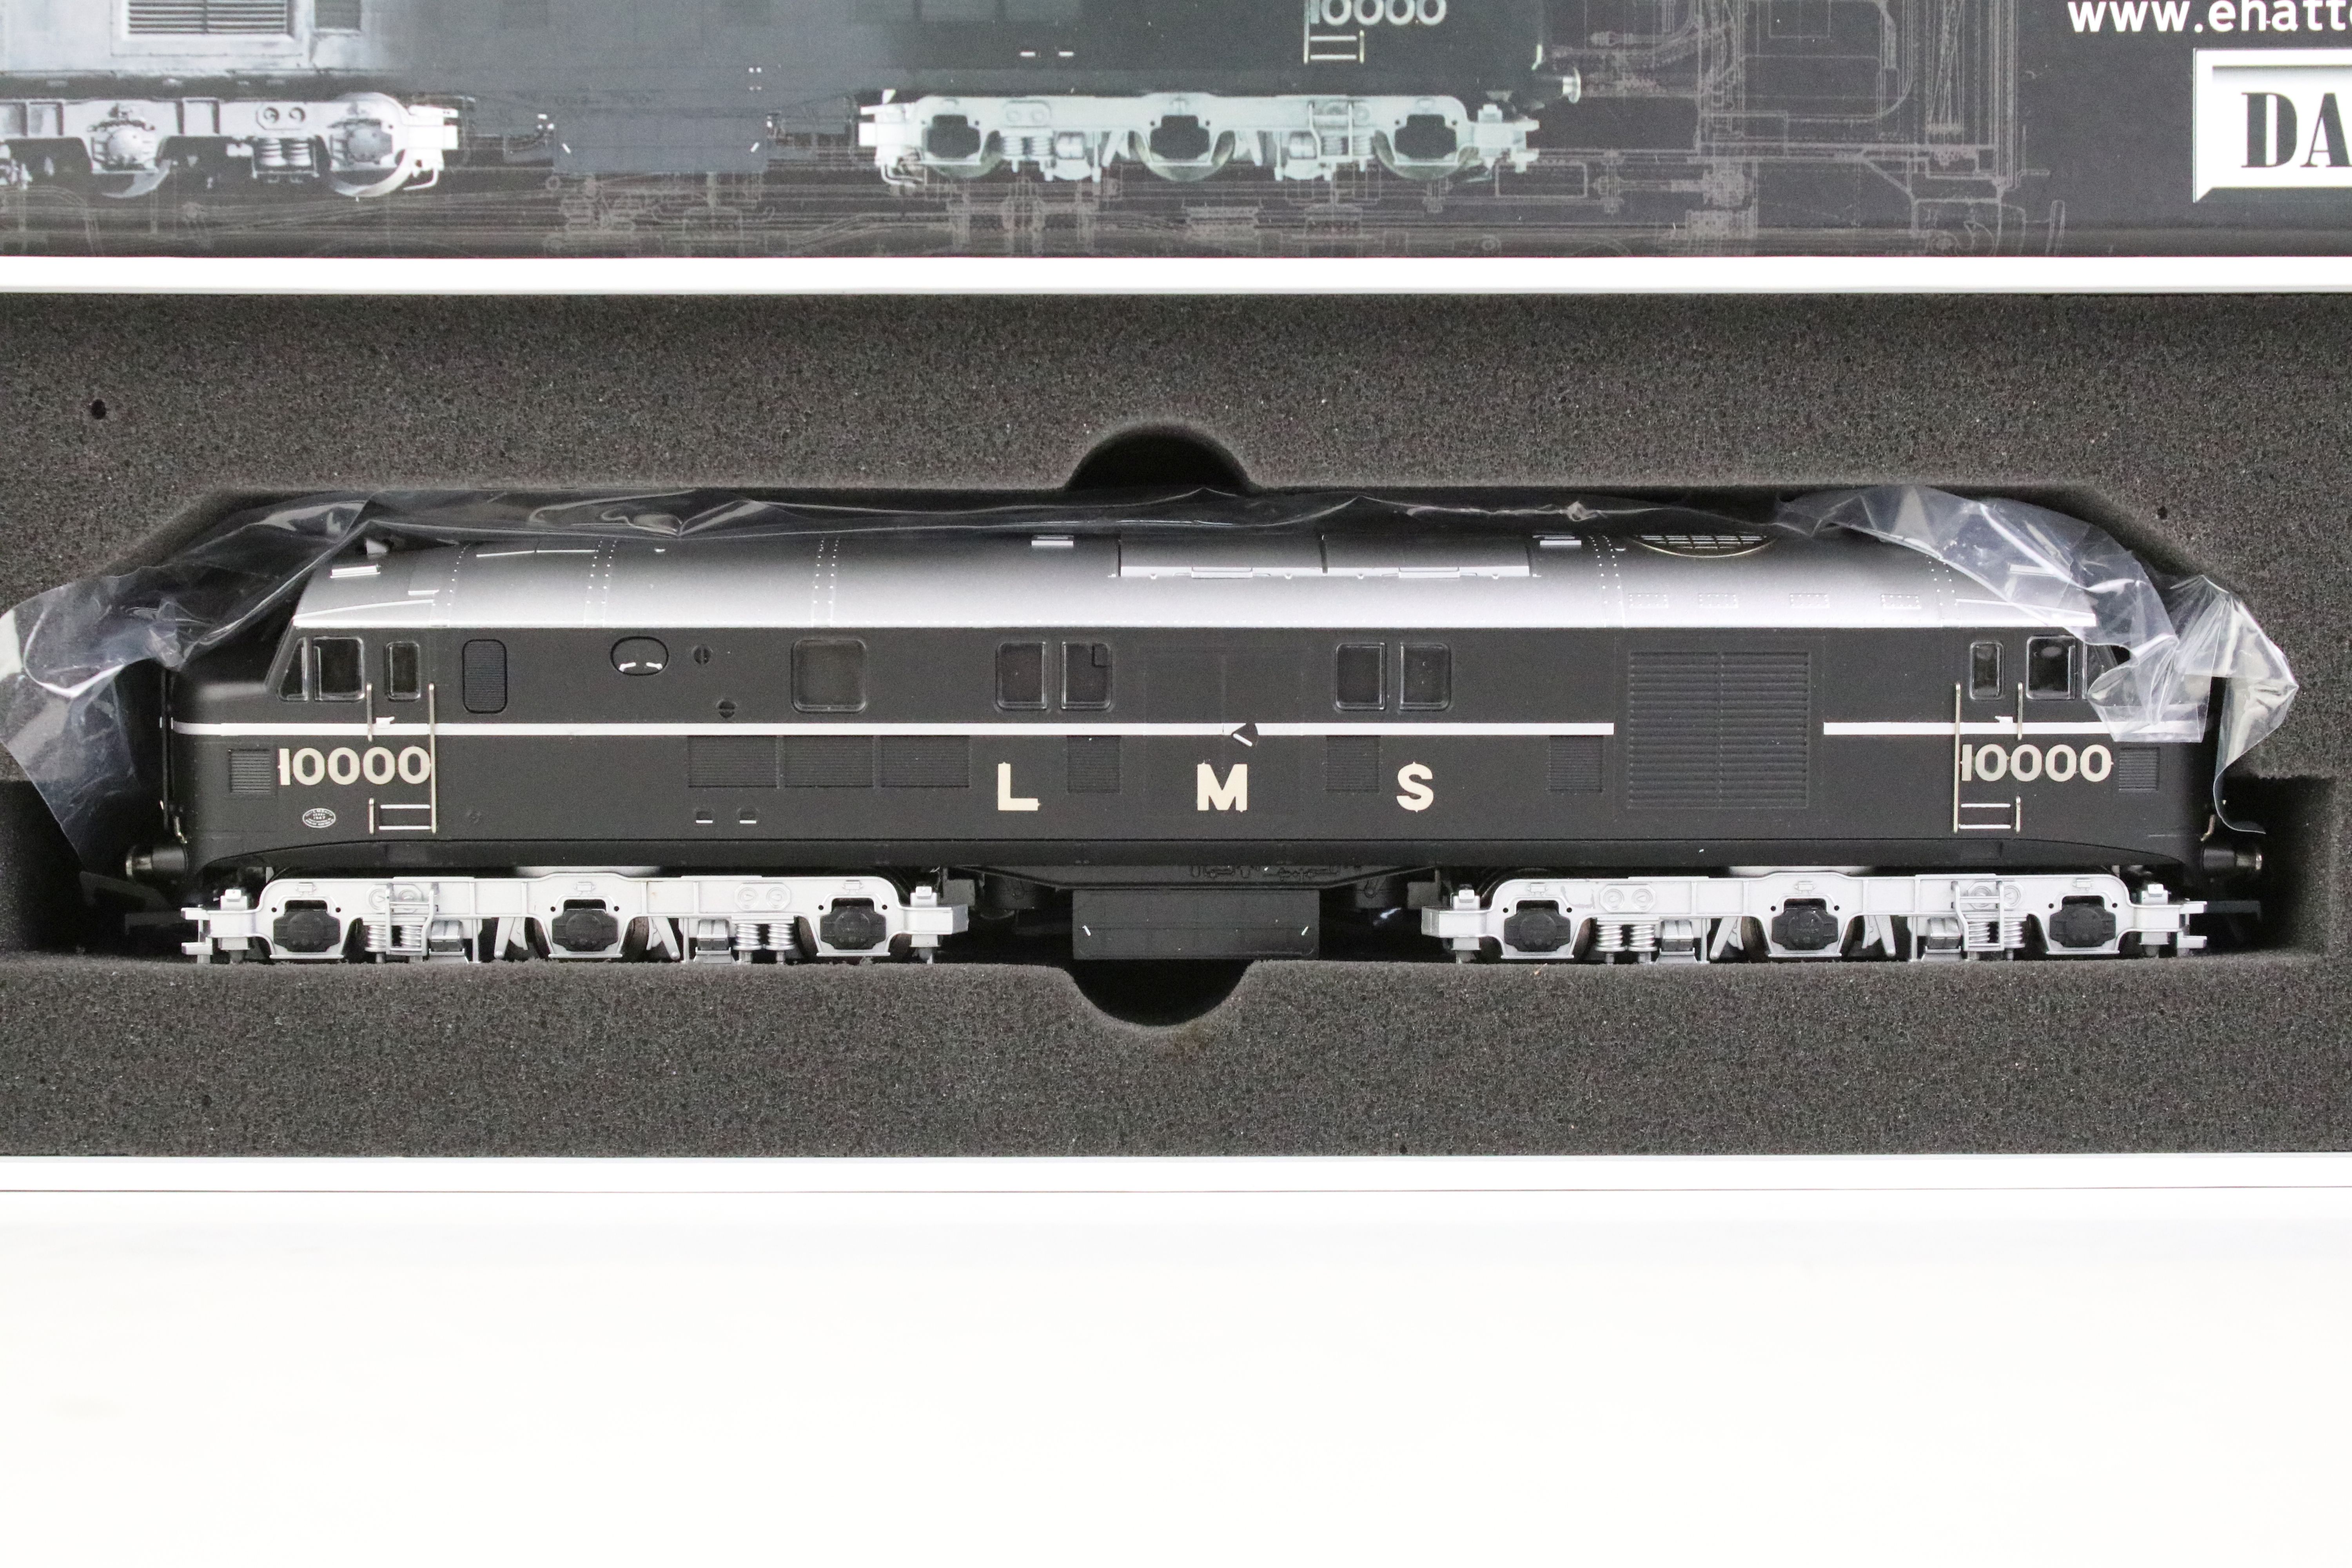 Boxed Dapol OO gauge 10000AP LMS black locomotive with chrome fittings December 1947 - March 1951 - Image 2 of 4